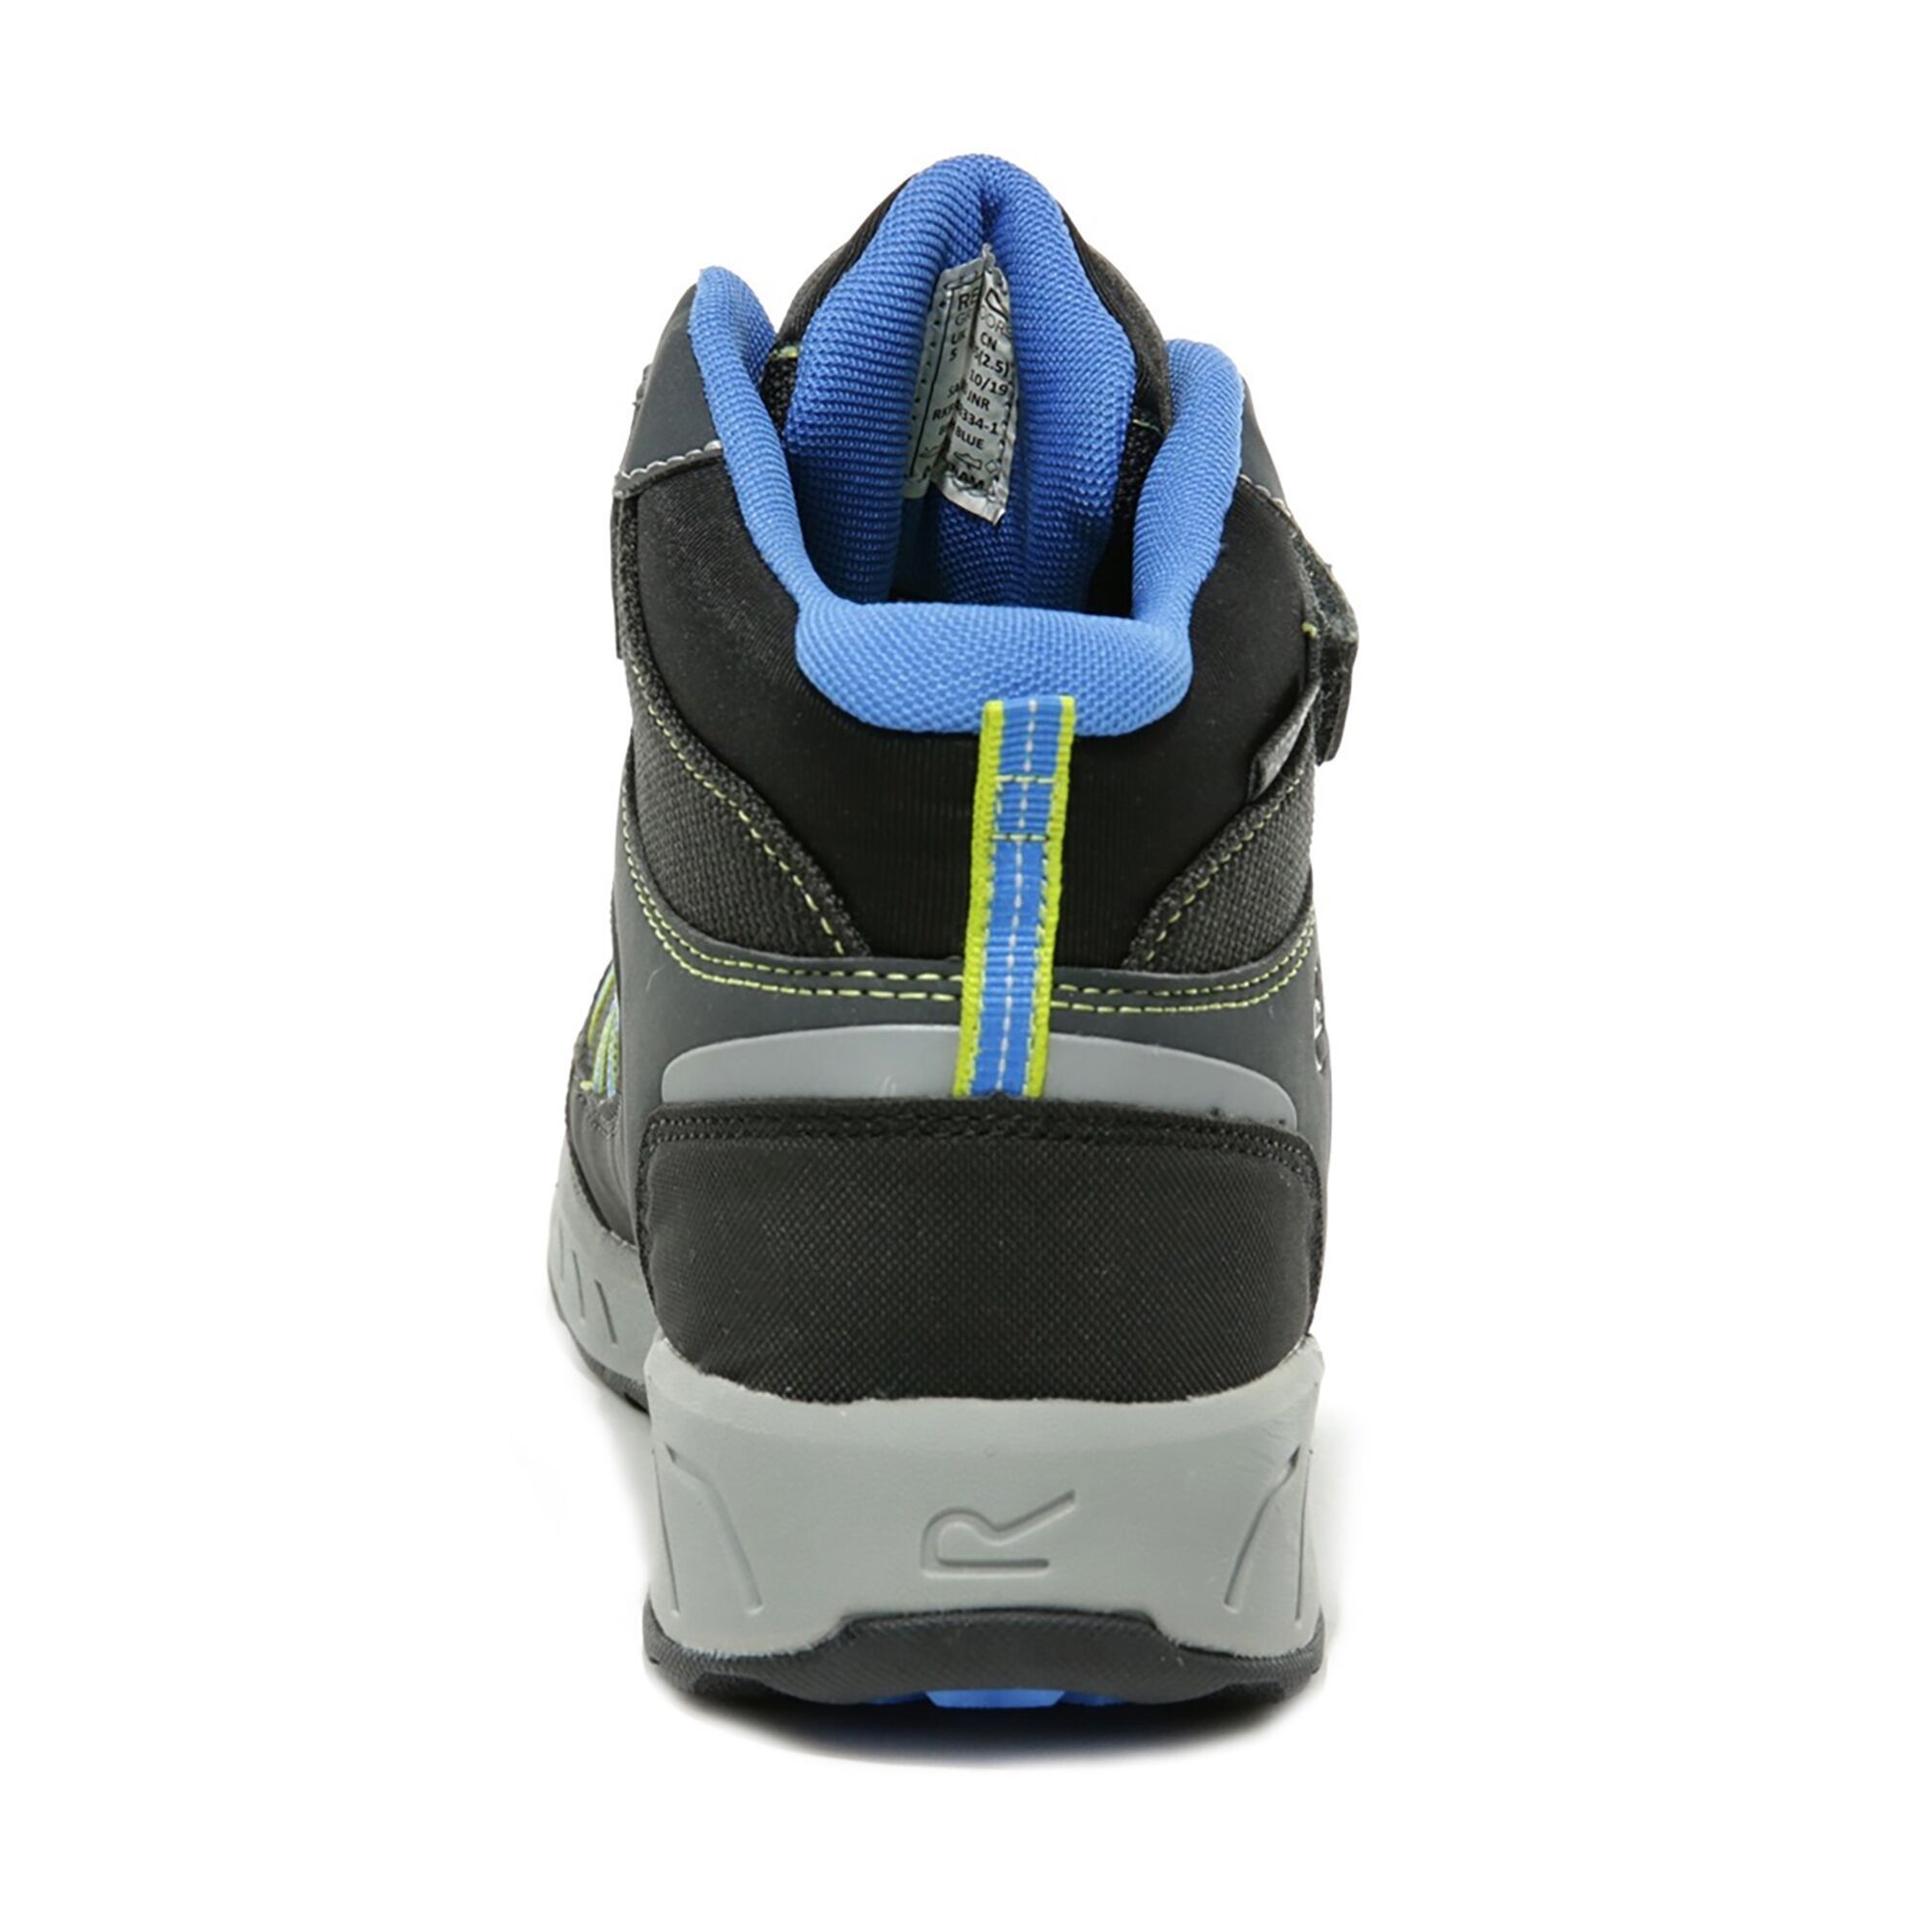 Polyester (40%), Polyurathane (60%). Isotex waterproof footwear, seam sealed with internal membrane bootee liner, Hydropel water resistant technology, PU nubuck and breathable mesh upper for lightweight protection. Elasticated lacing system, hook and loop fastening, deep padded neoprene collar and mesh tongue. Stabilising shank technology for underfoot protection and to reduce foot fatigue, EVA midsole for lightweight cushioning and reduced impact on young joints. Lightweight hardwearing rubber outsole with multi-directional cleat pattern.